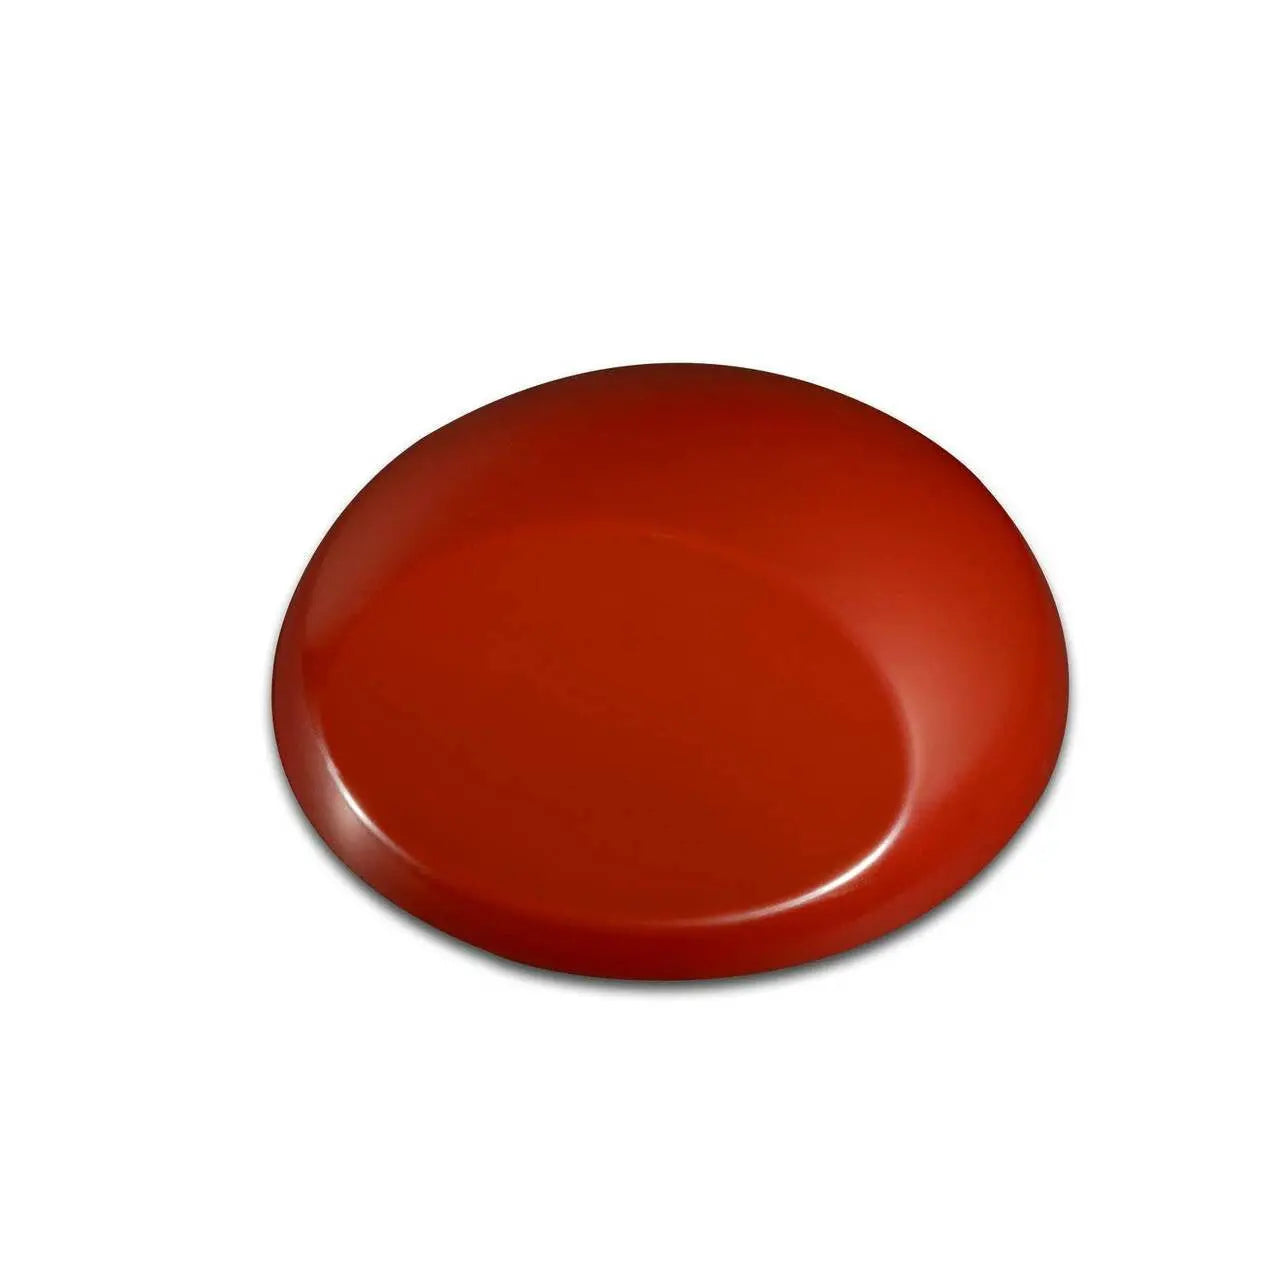 Wicked Red Oxide W012 Gallone